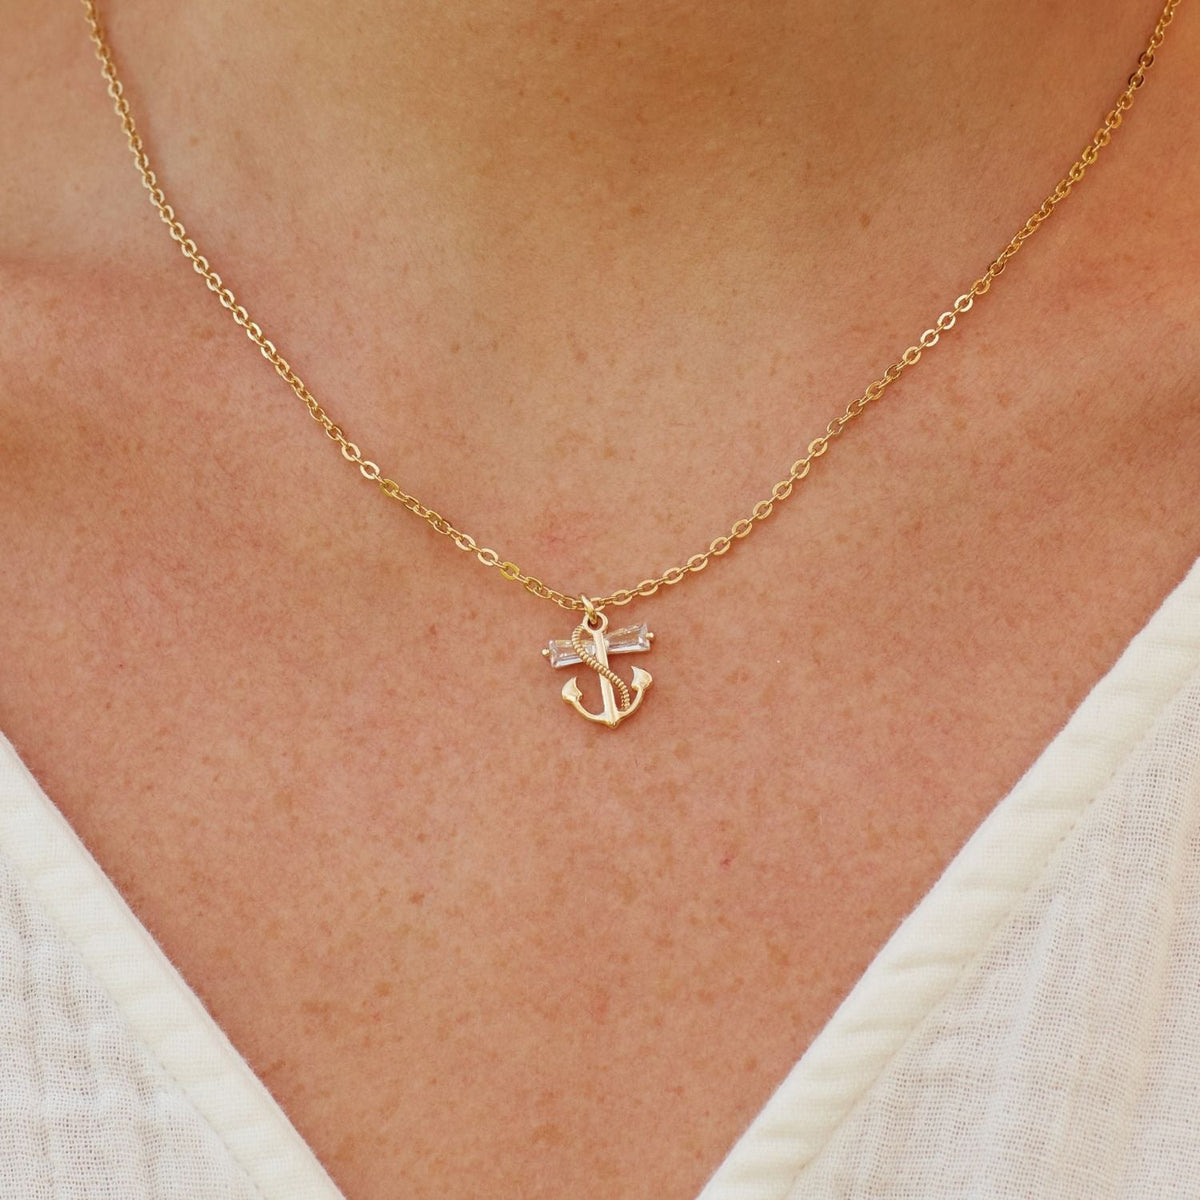 To My Daughter | Psalm 37:4 | Anchor Necklace